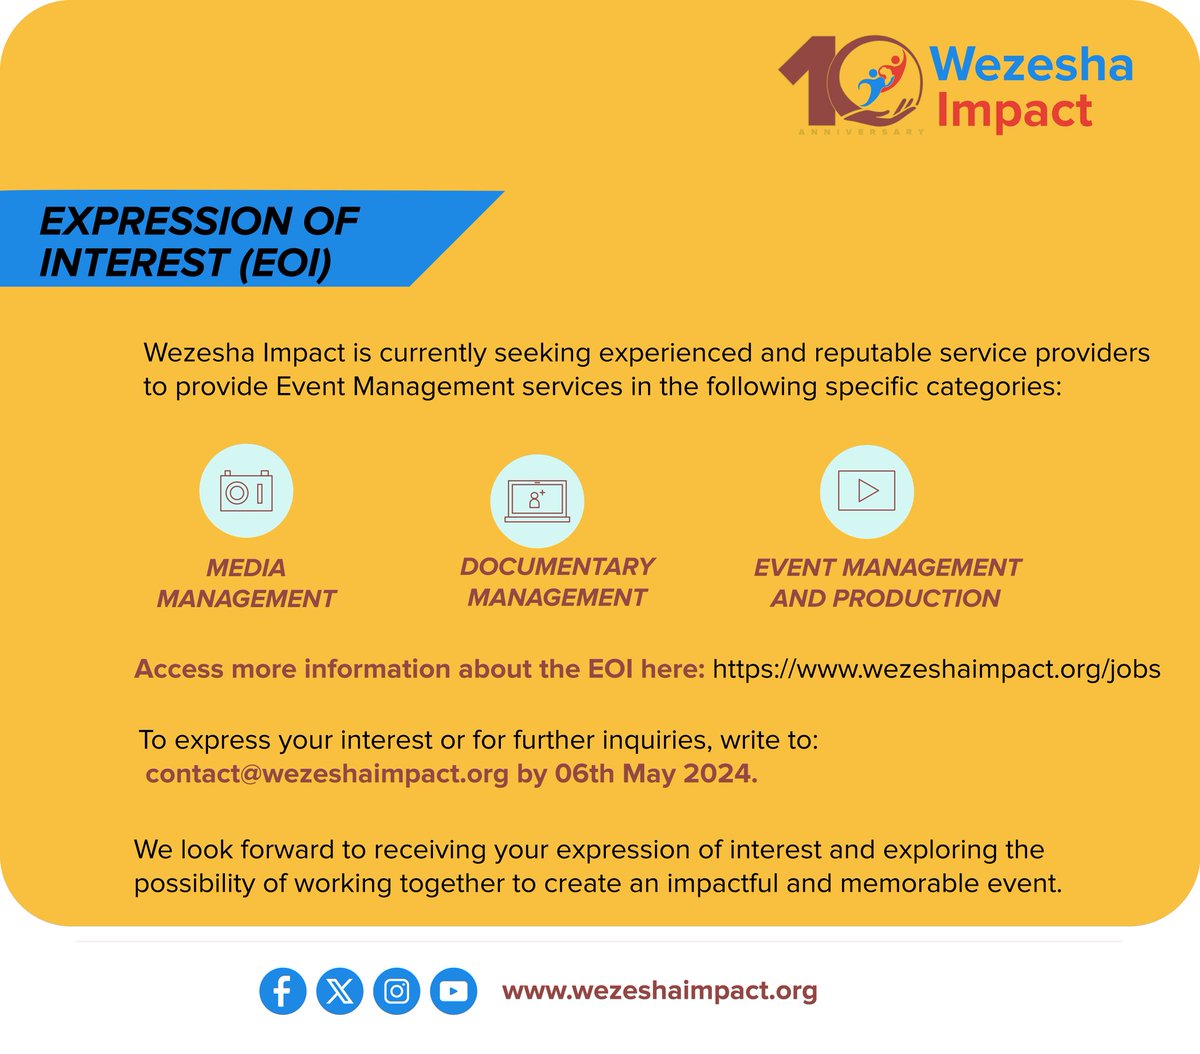 EXPRESSION OF INTEREST(EOI) ALERT! Wezesha Impact is currently seeking experienced and reputable service providers to provide Event Management services. Read more: static1.squarespace.com/static/5ac5433…